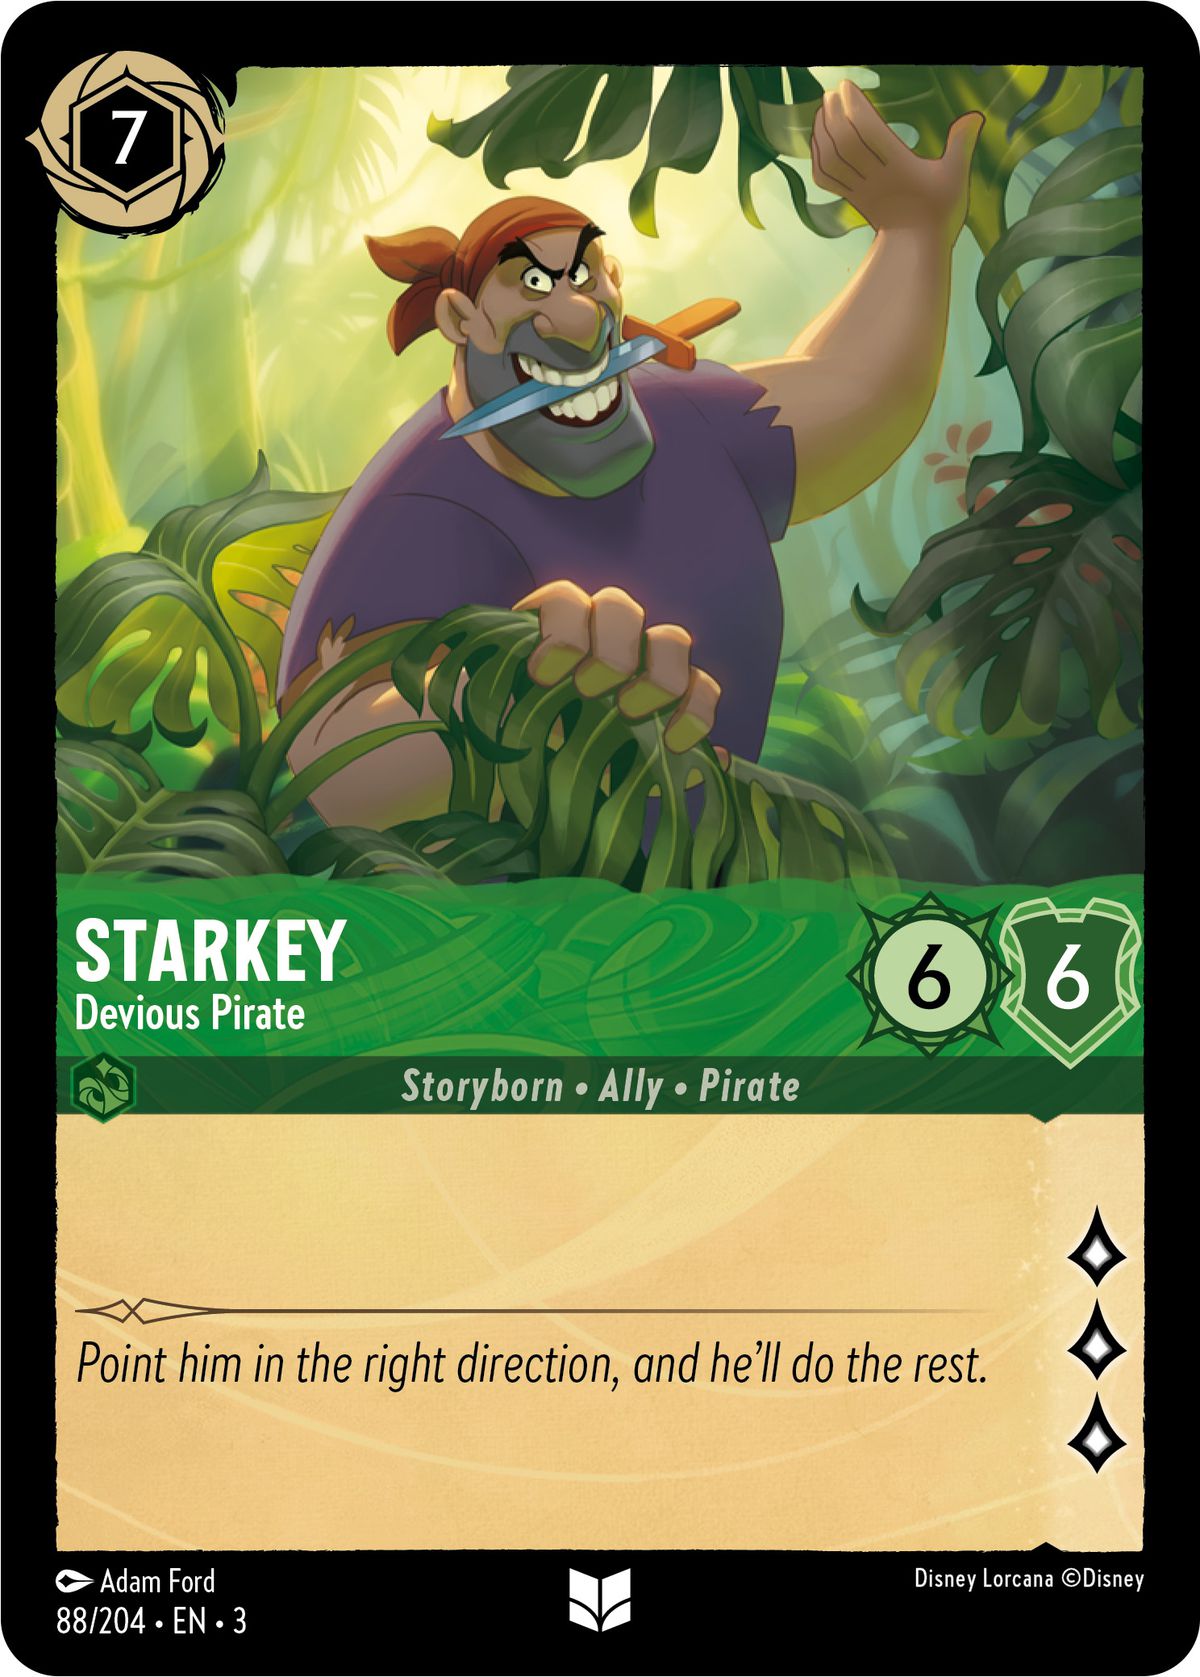 Starkey, Devious Pirate is a three lore, 6/6 that costs 7 ink to play.